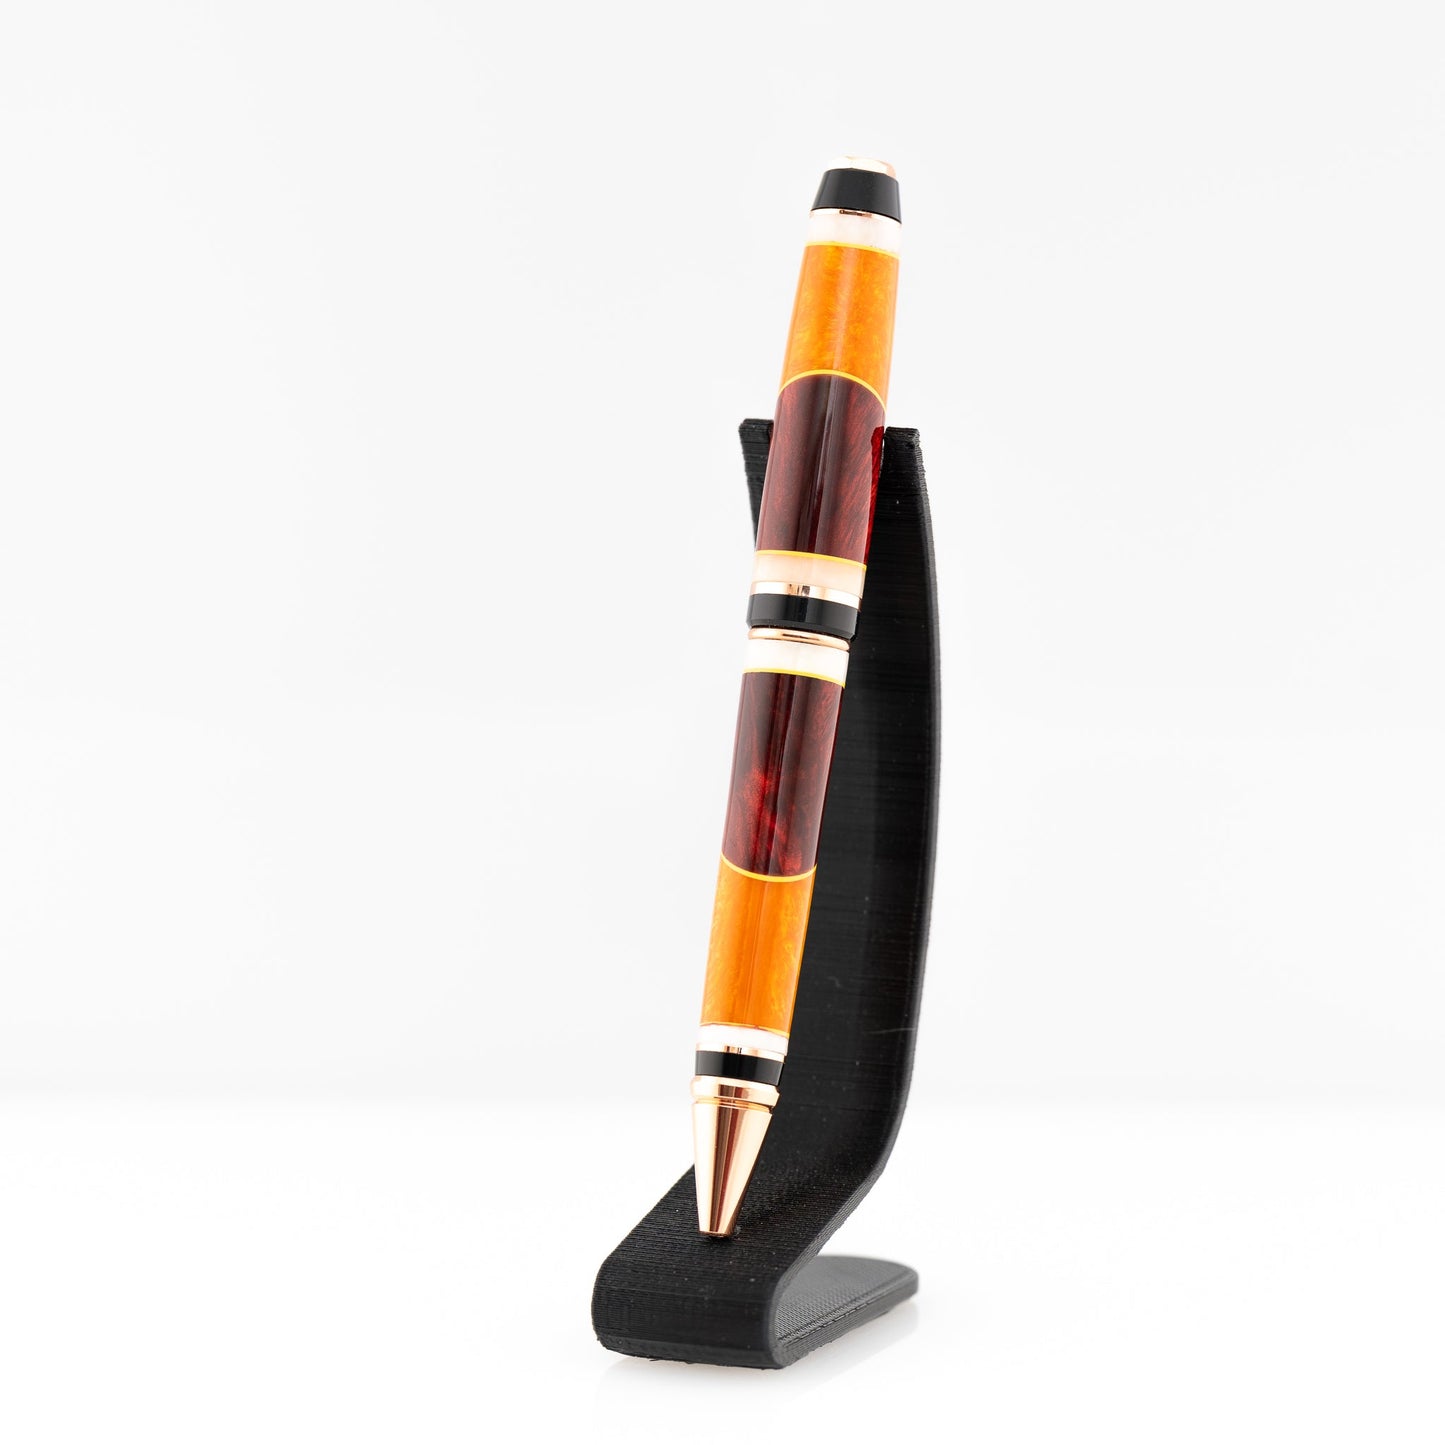 A handmade red, orange, and yellow resin cigar twist ballpoint pen with bright copper plating.